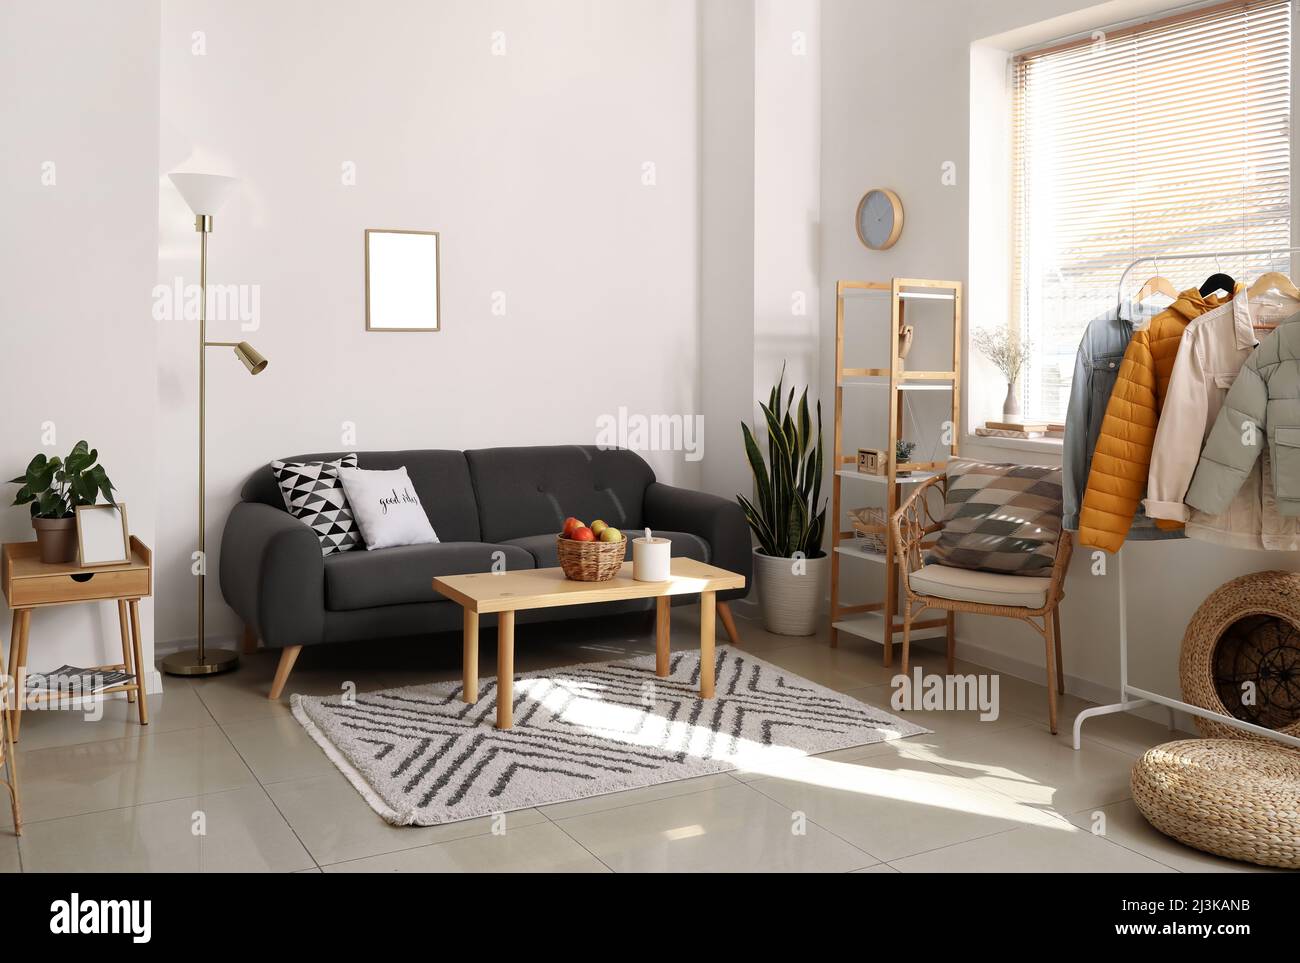 Interior of light room with black sofa and warm jackets Stock Photo